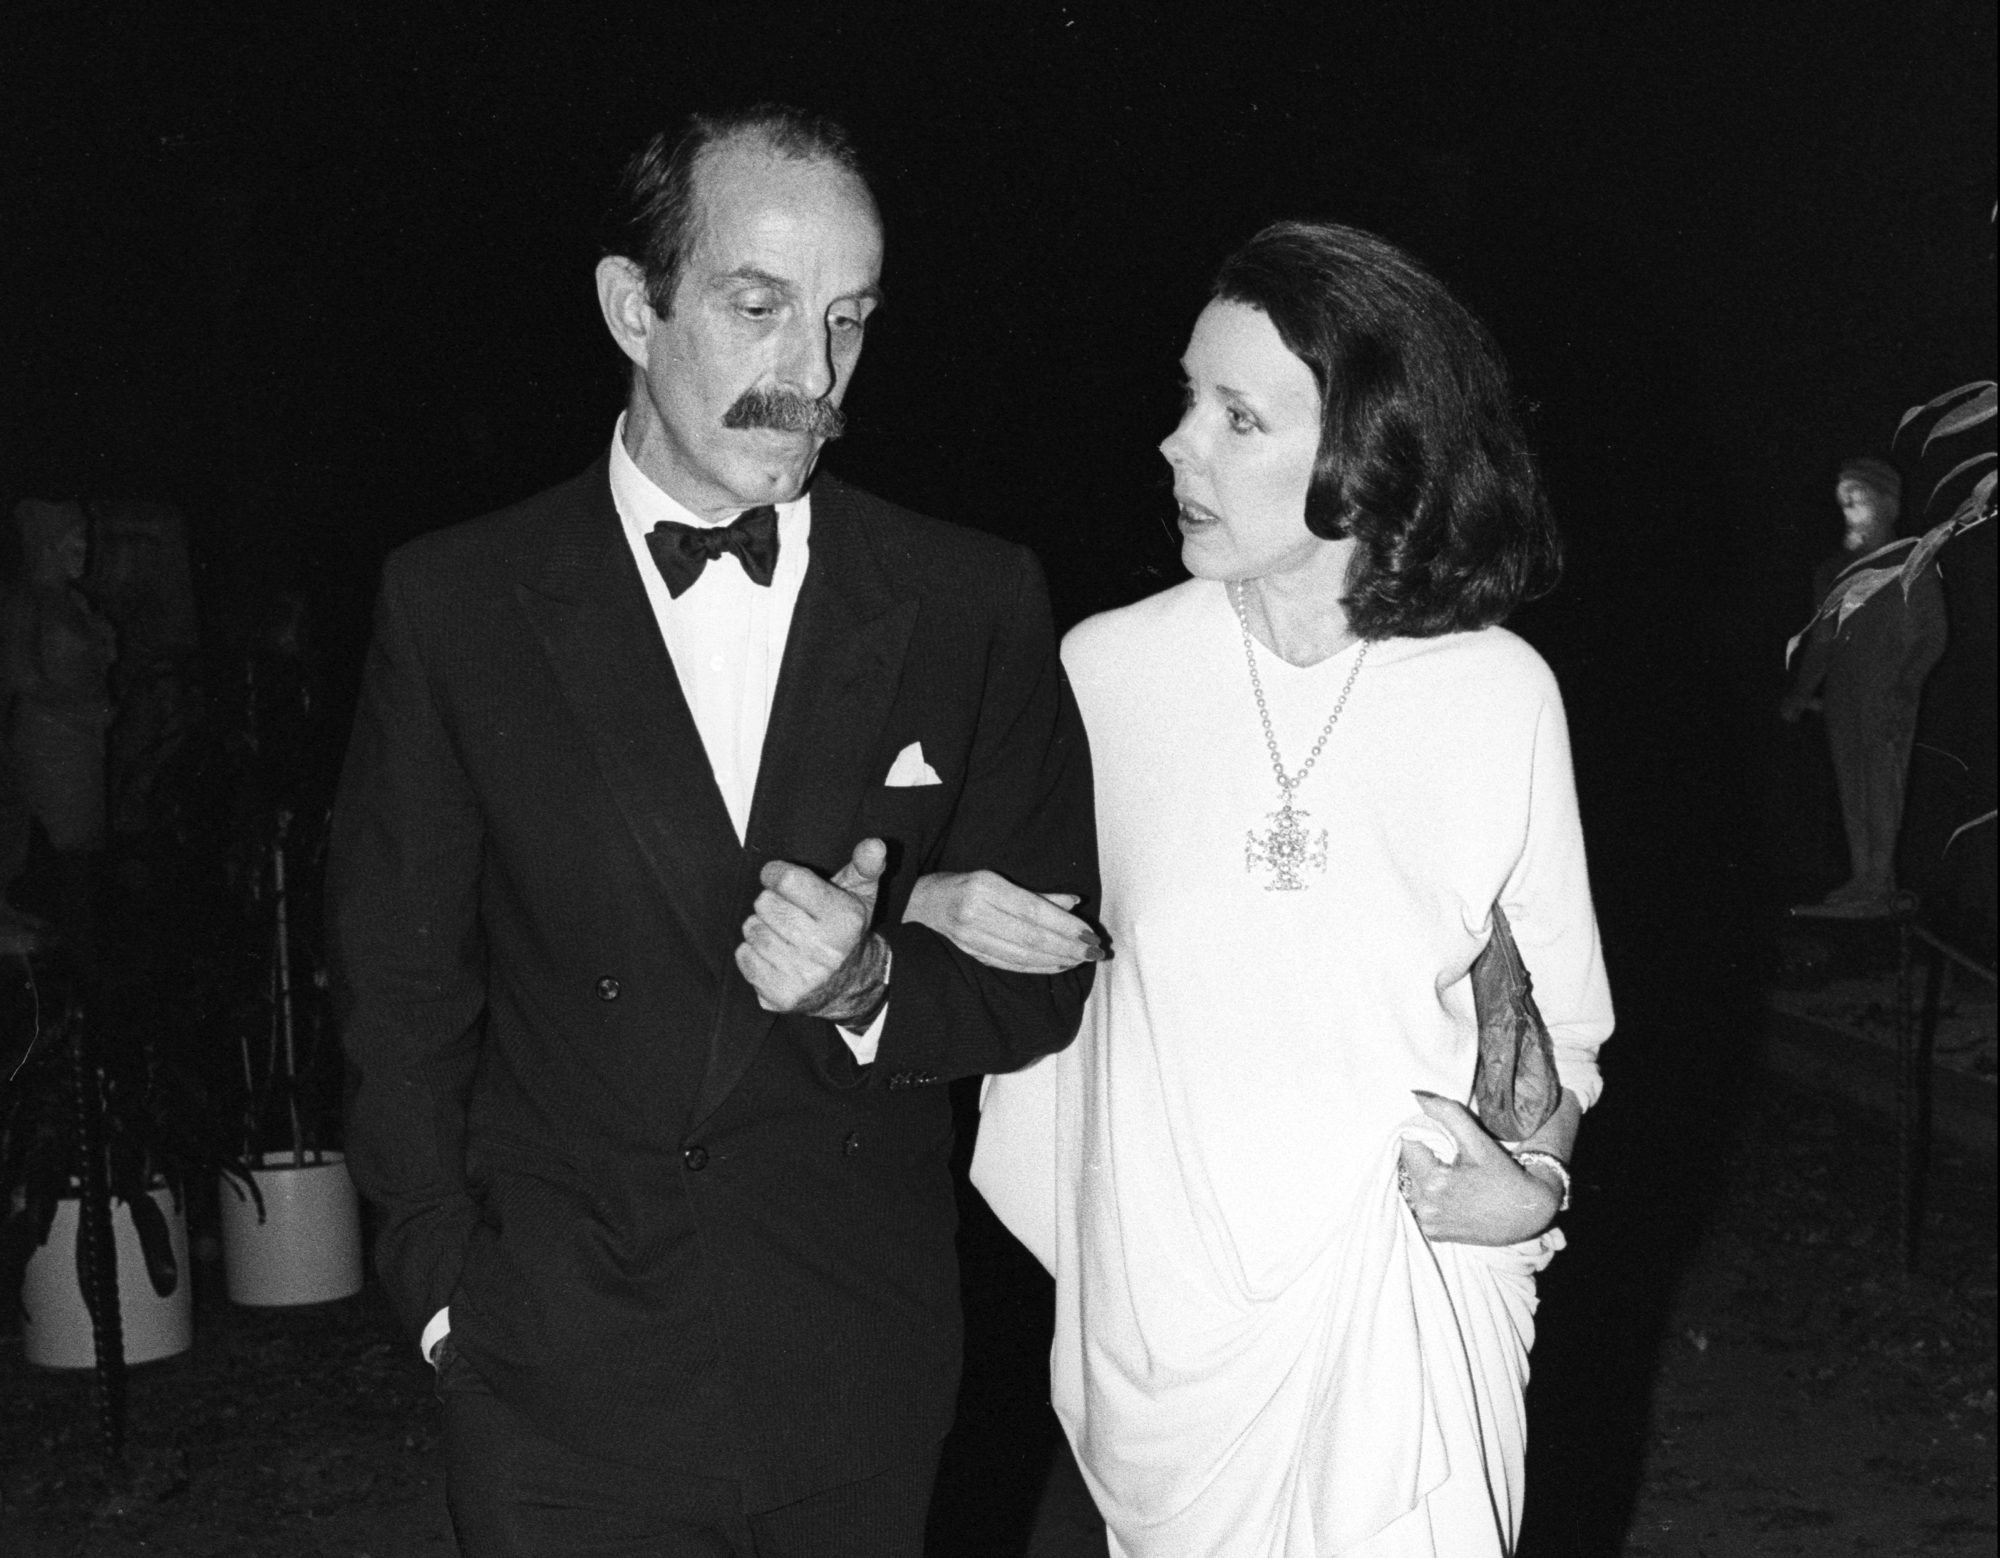 In a black-and-white photograph, a man in a tuxedo and bow tie and a woman in a long white dress walk arm in arm.